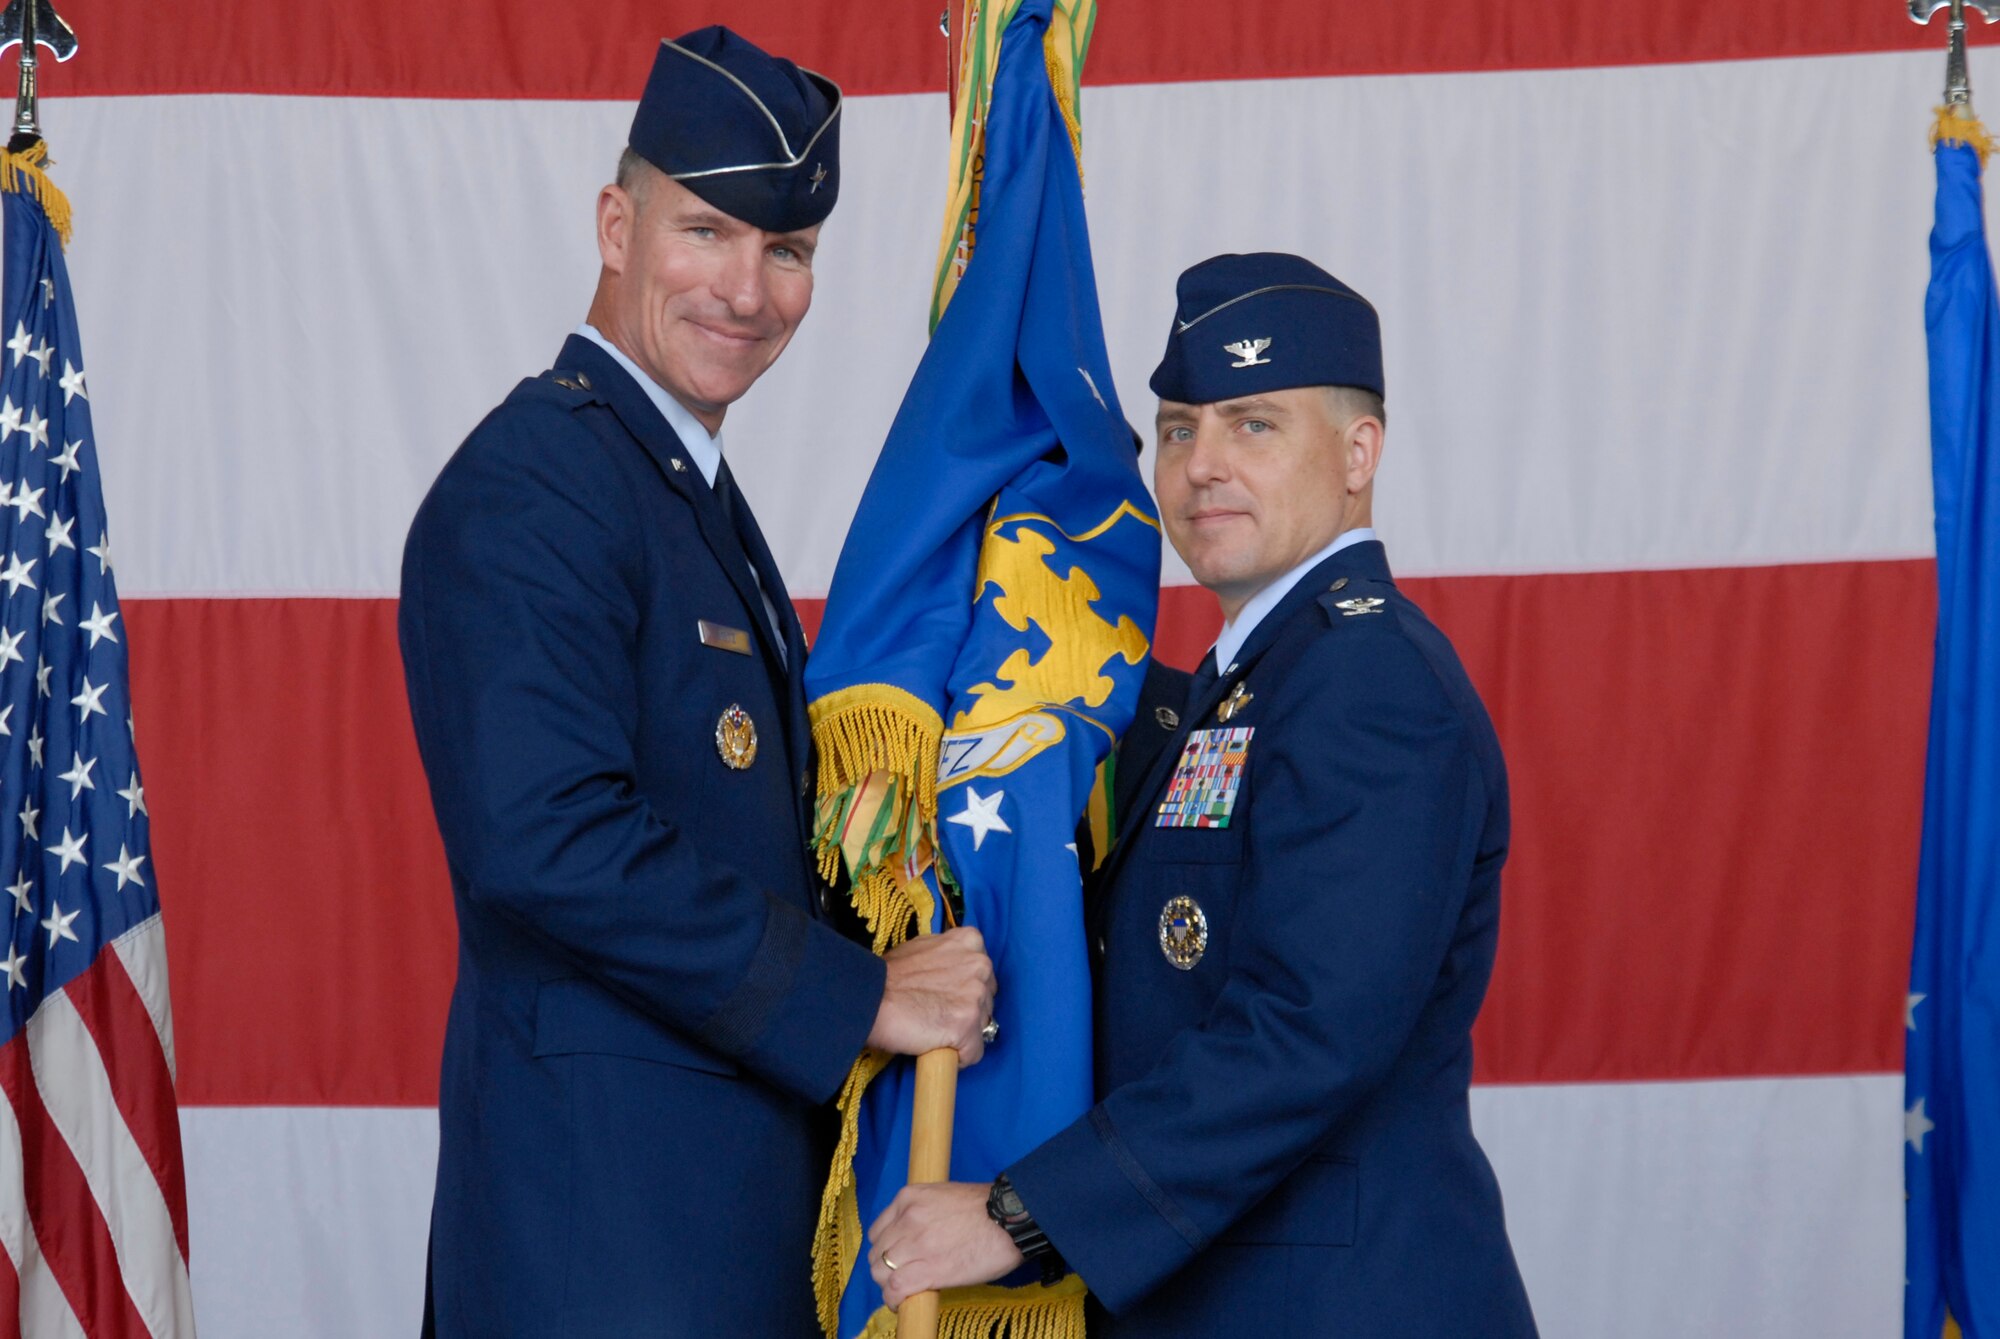 KUNSAN AIR BASE, Republic of Korea -- Brig. Gen. Michael Keltz, 7th Air Force vice commander, hands the guidon to Col. Robert Givens, 8th Fighter Wing commander, during the 8th FW Change of Command ceremony here Sept. 15. Colonel Givens is the 49th Wolf Pack commander to command the 8th Fighter Wing. (U.S. Air Force photo/Staff Sgt. Darnell T. Cannady)